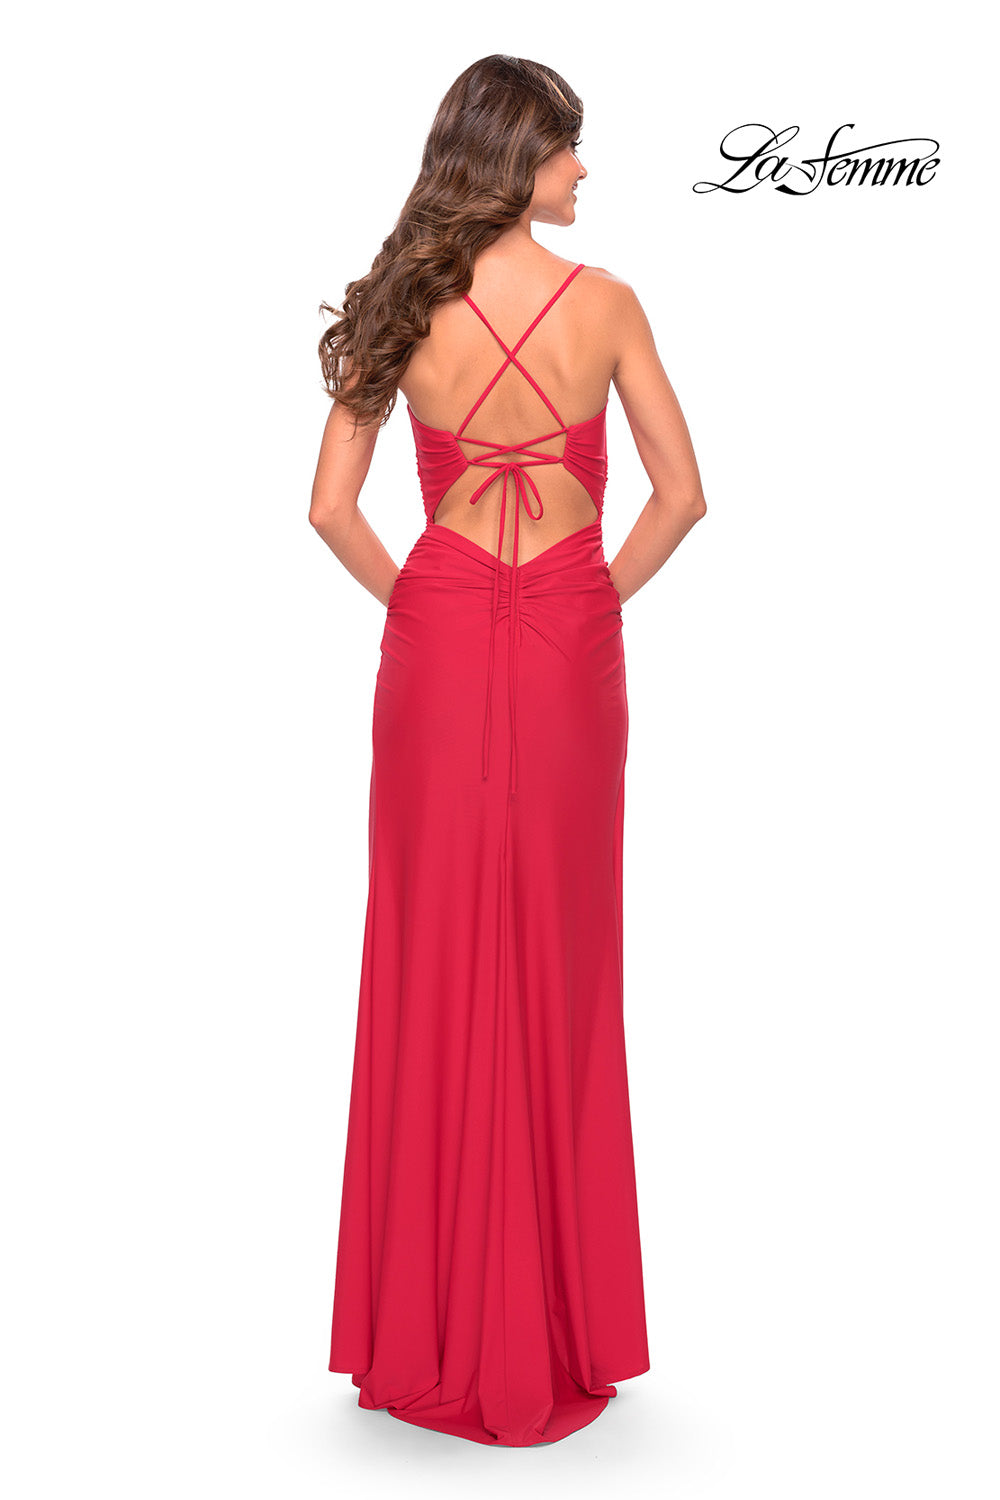 La Femme 31127 prom dress images.  La Femme 31127 is available in these colors: Emerald, Red, Royal Blue.